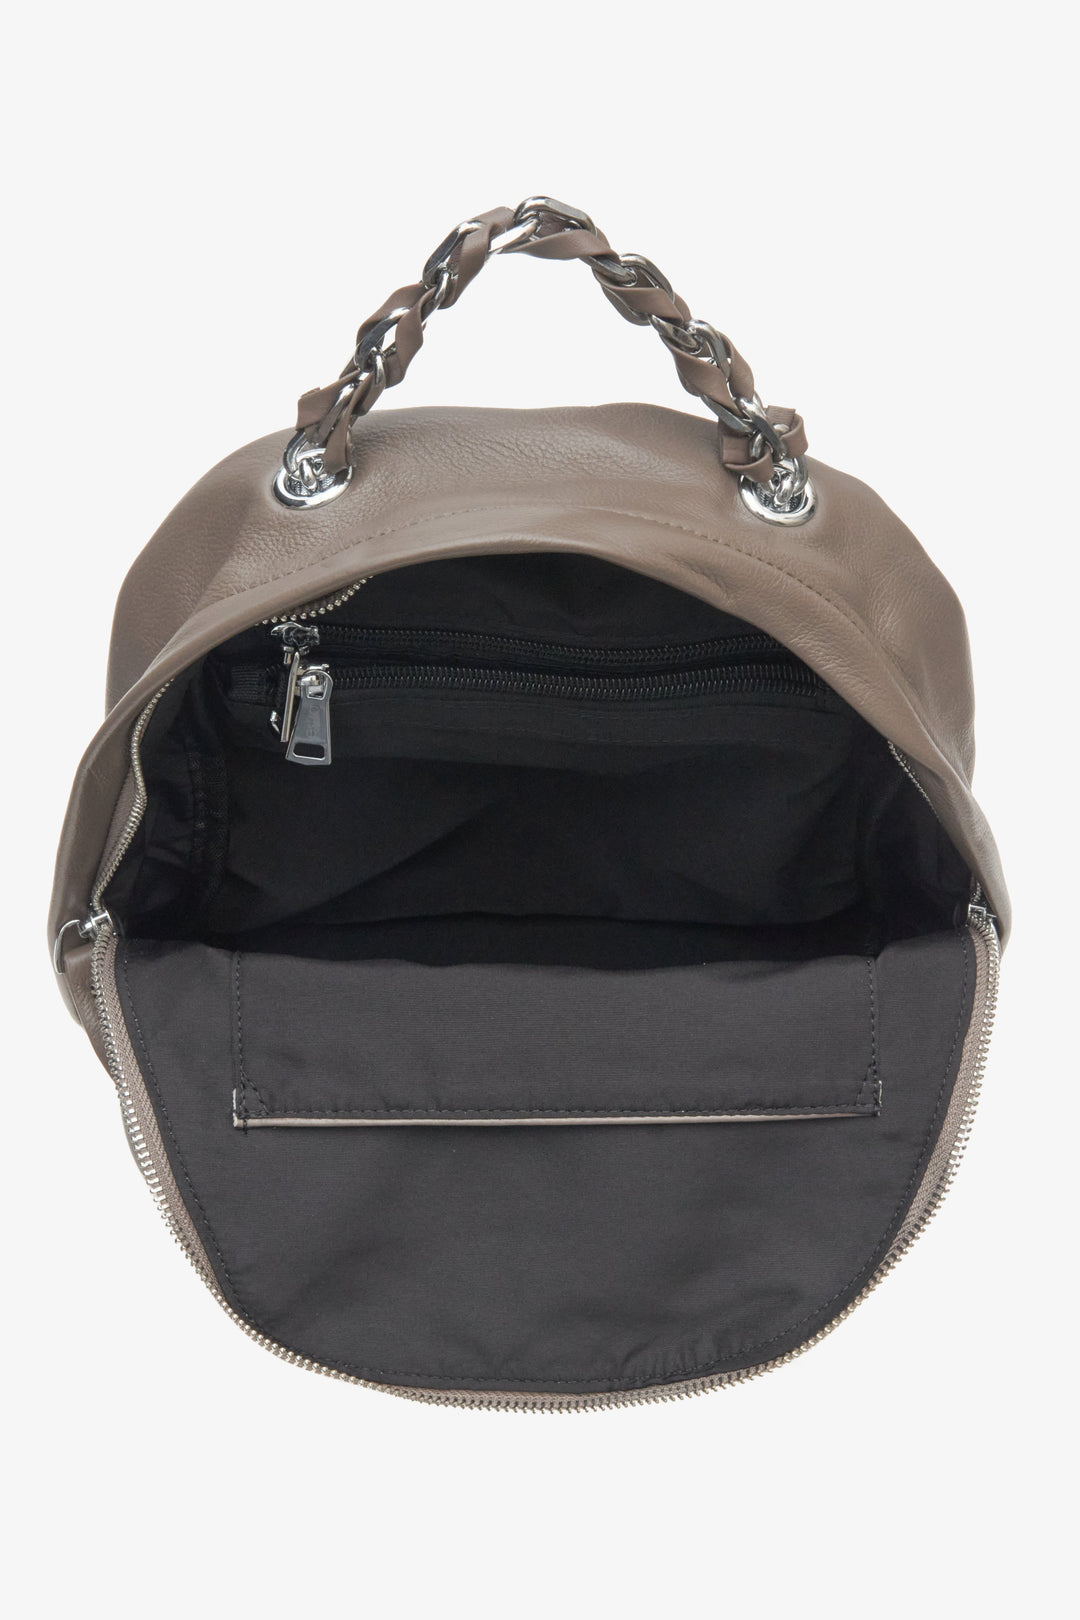 Women's grey and brown backpack made of genuine leather by Estro - close-up of the interior.